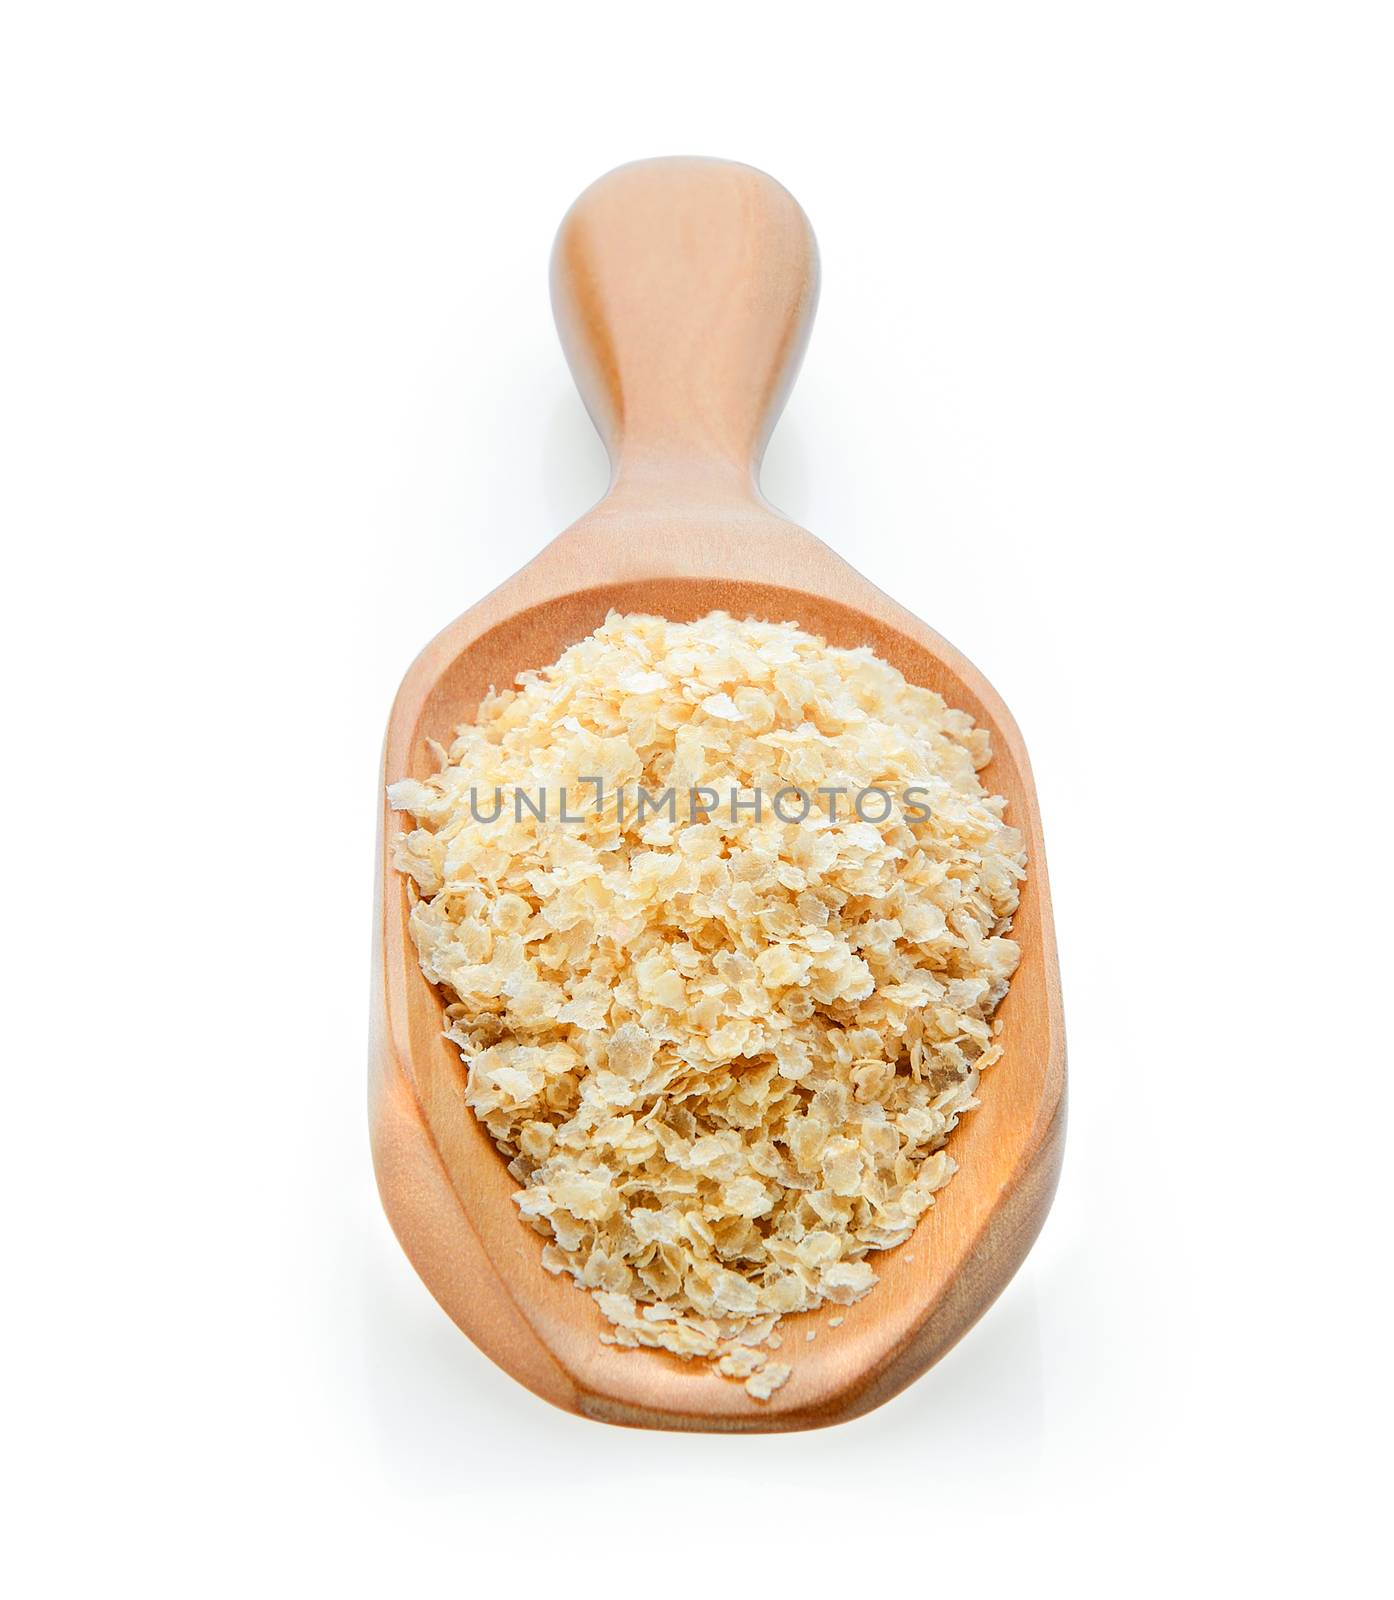 amaranth seeds on wooden scoop over white background by sommai